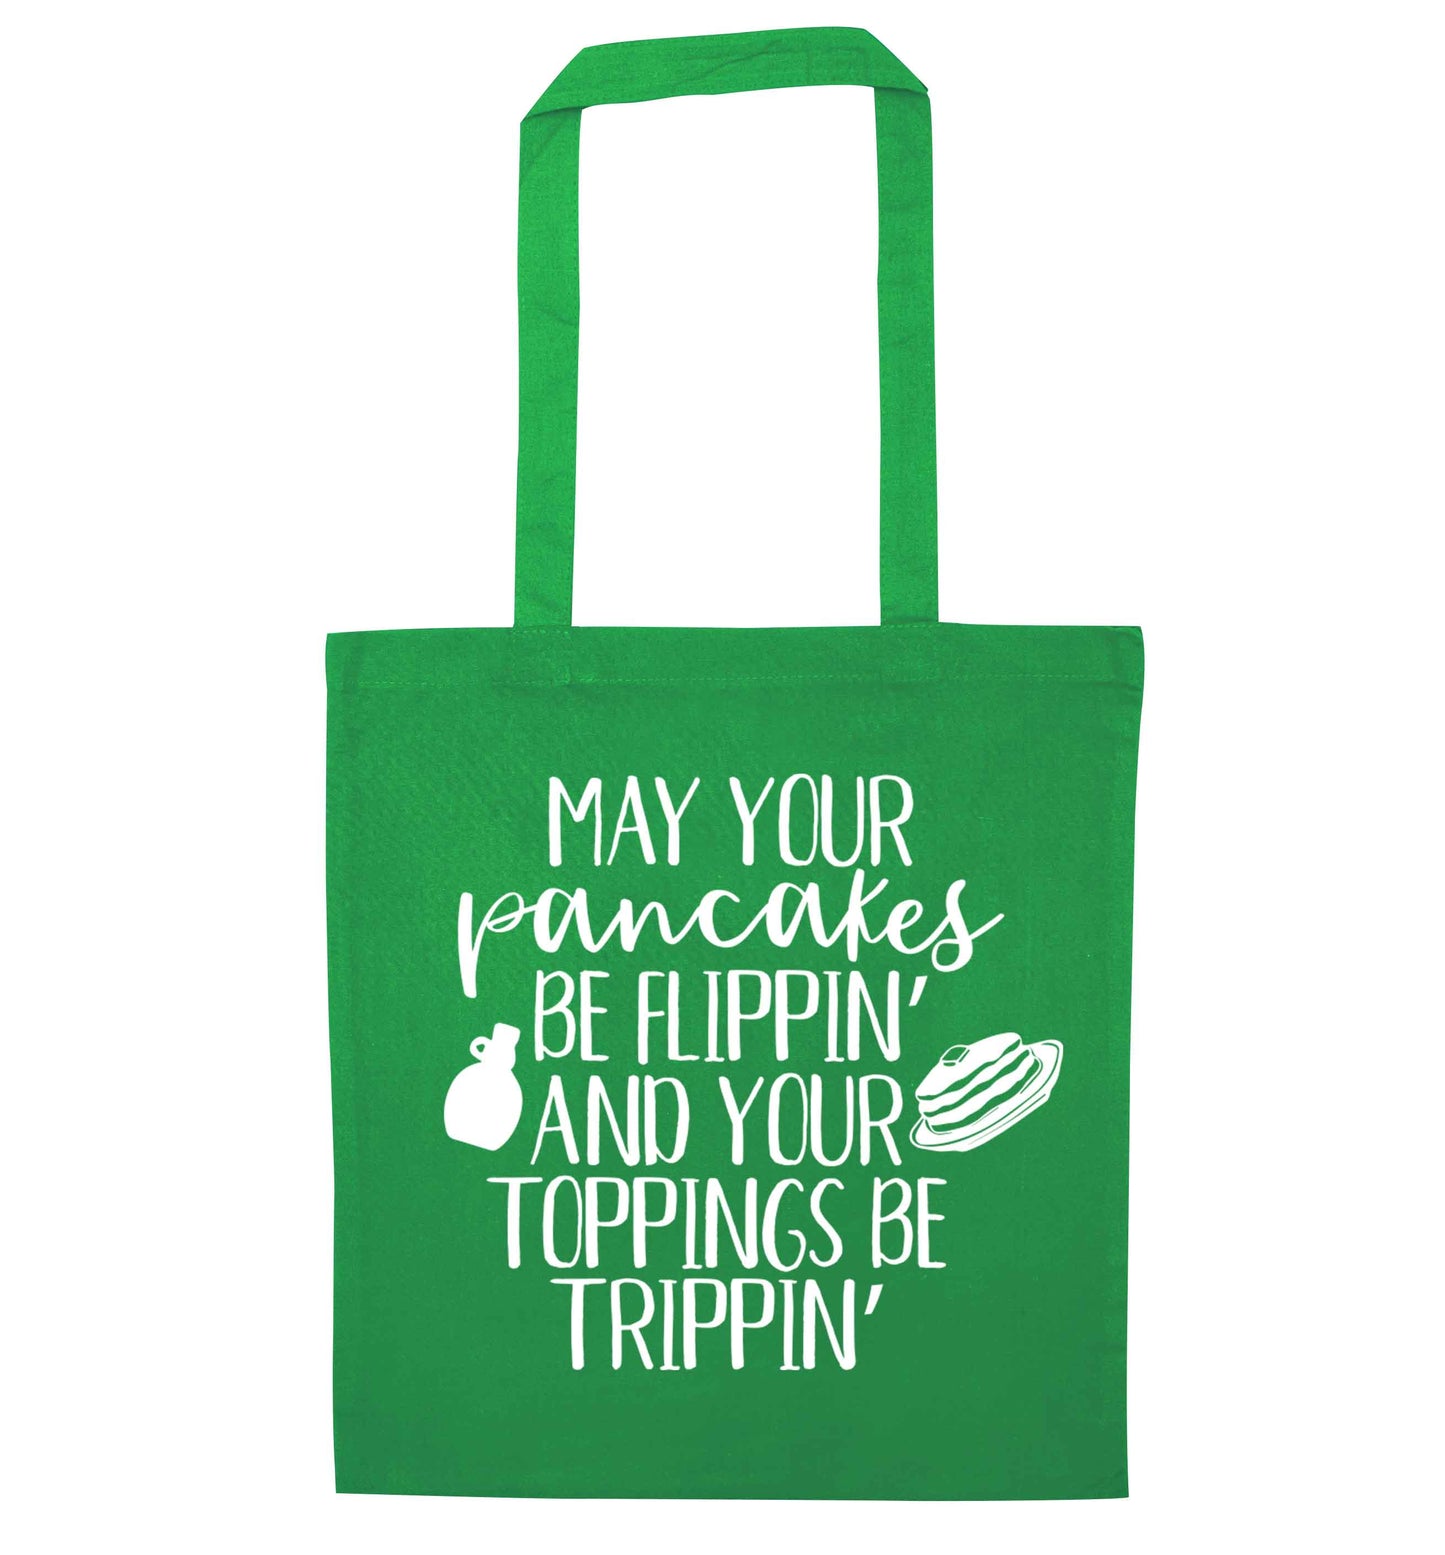 May your pancakes be flippin' and your toppings be trippin' green tote bag